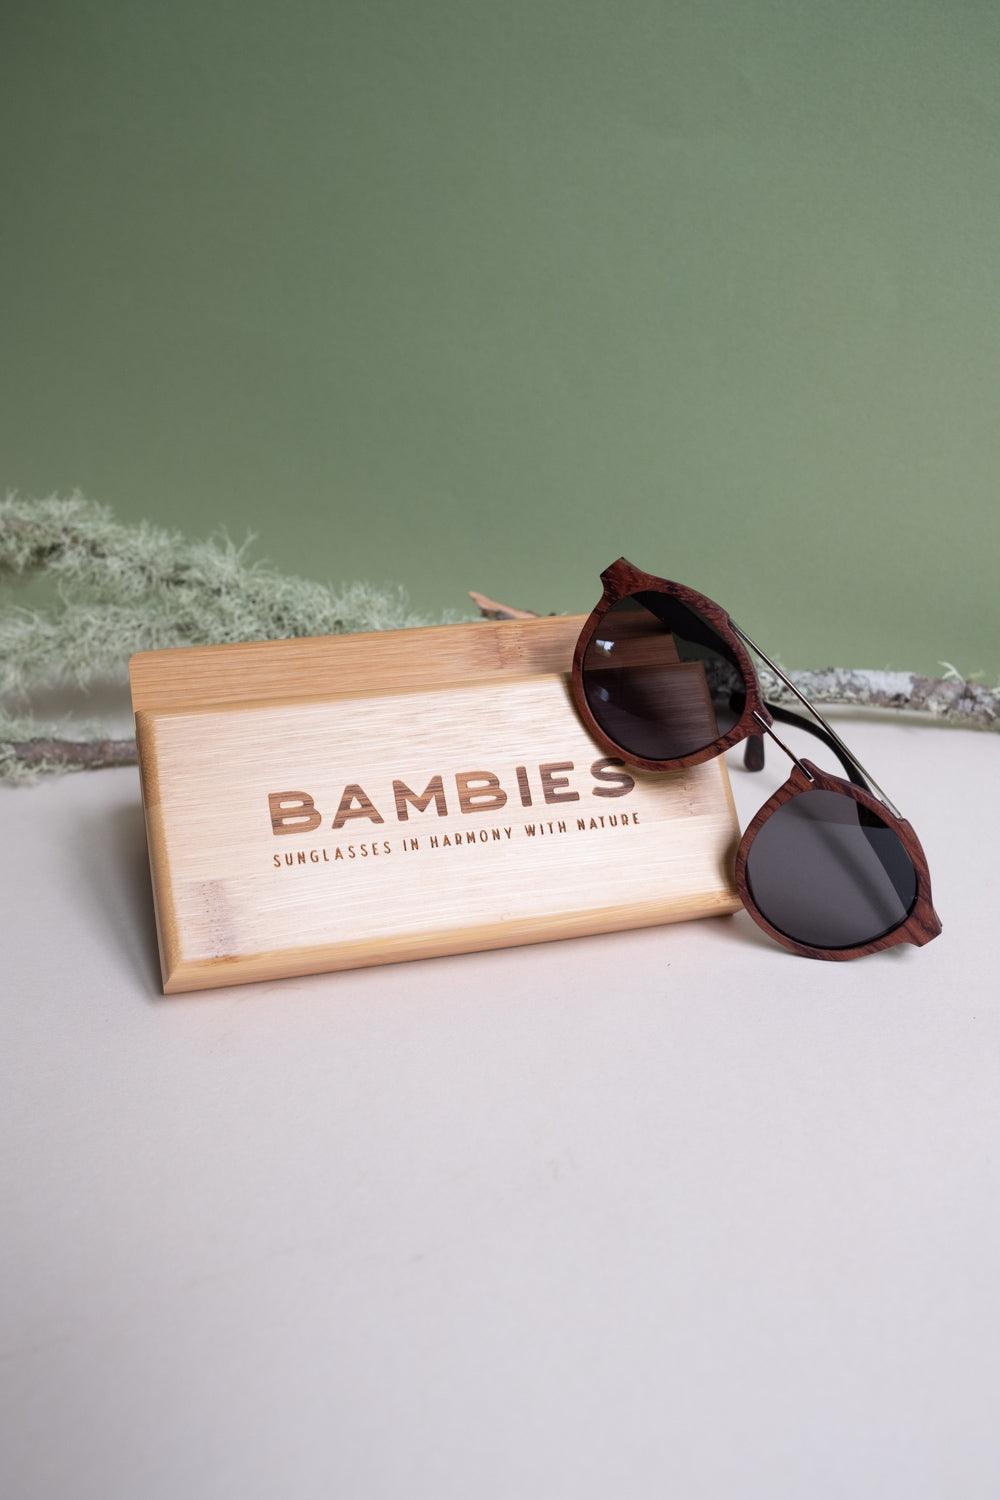 All sunglasses - Bambies